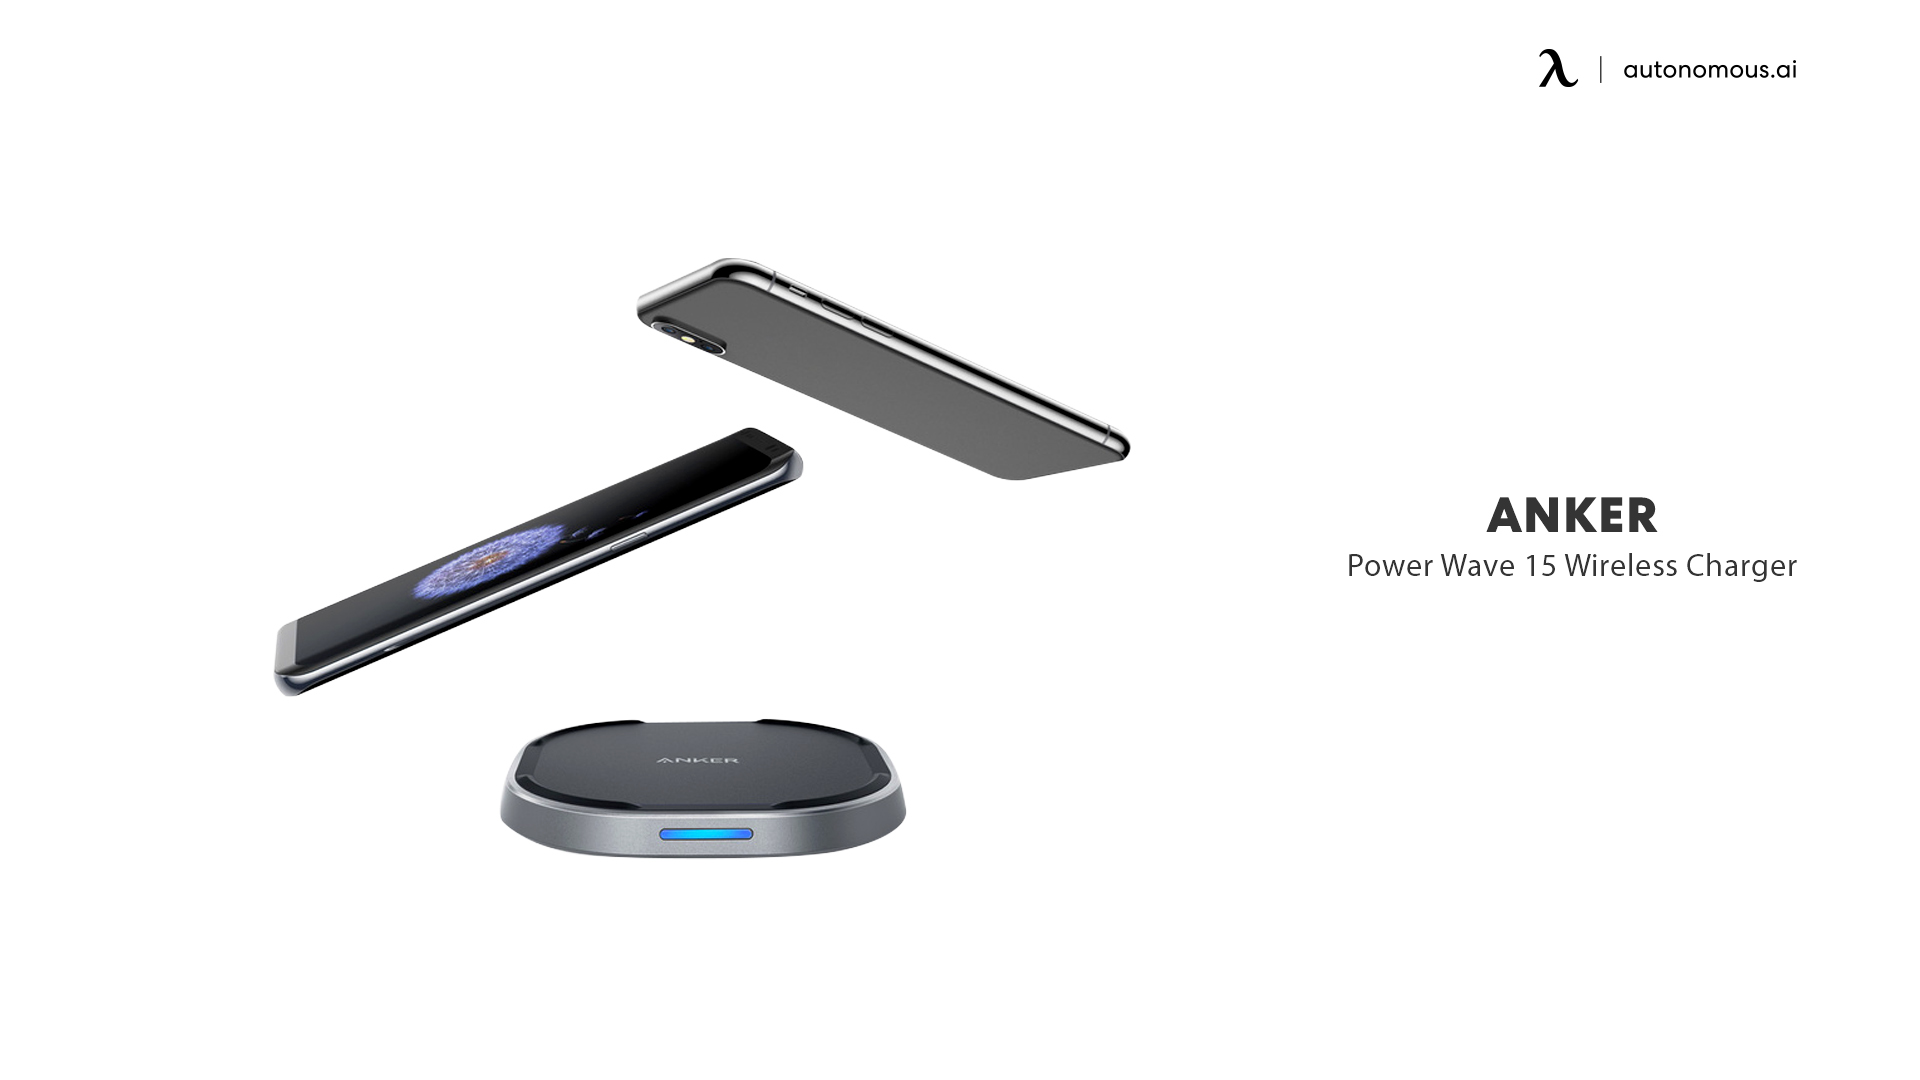 Anker Power Wave 15 wireless charging